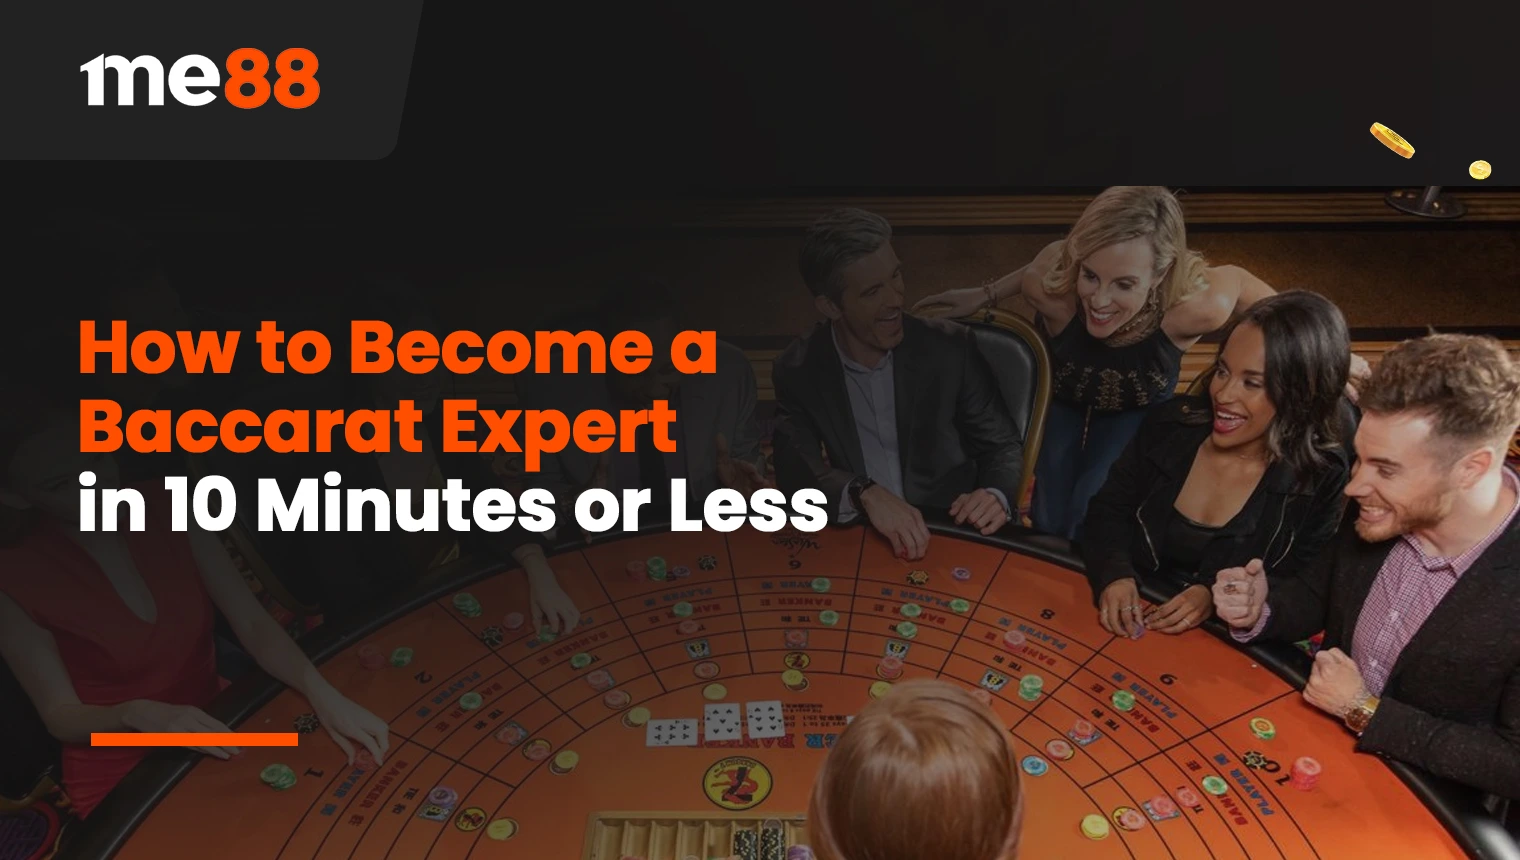 How to Become a Baccarat Expert in 10 Minutes or Less